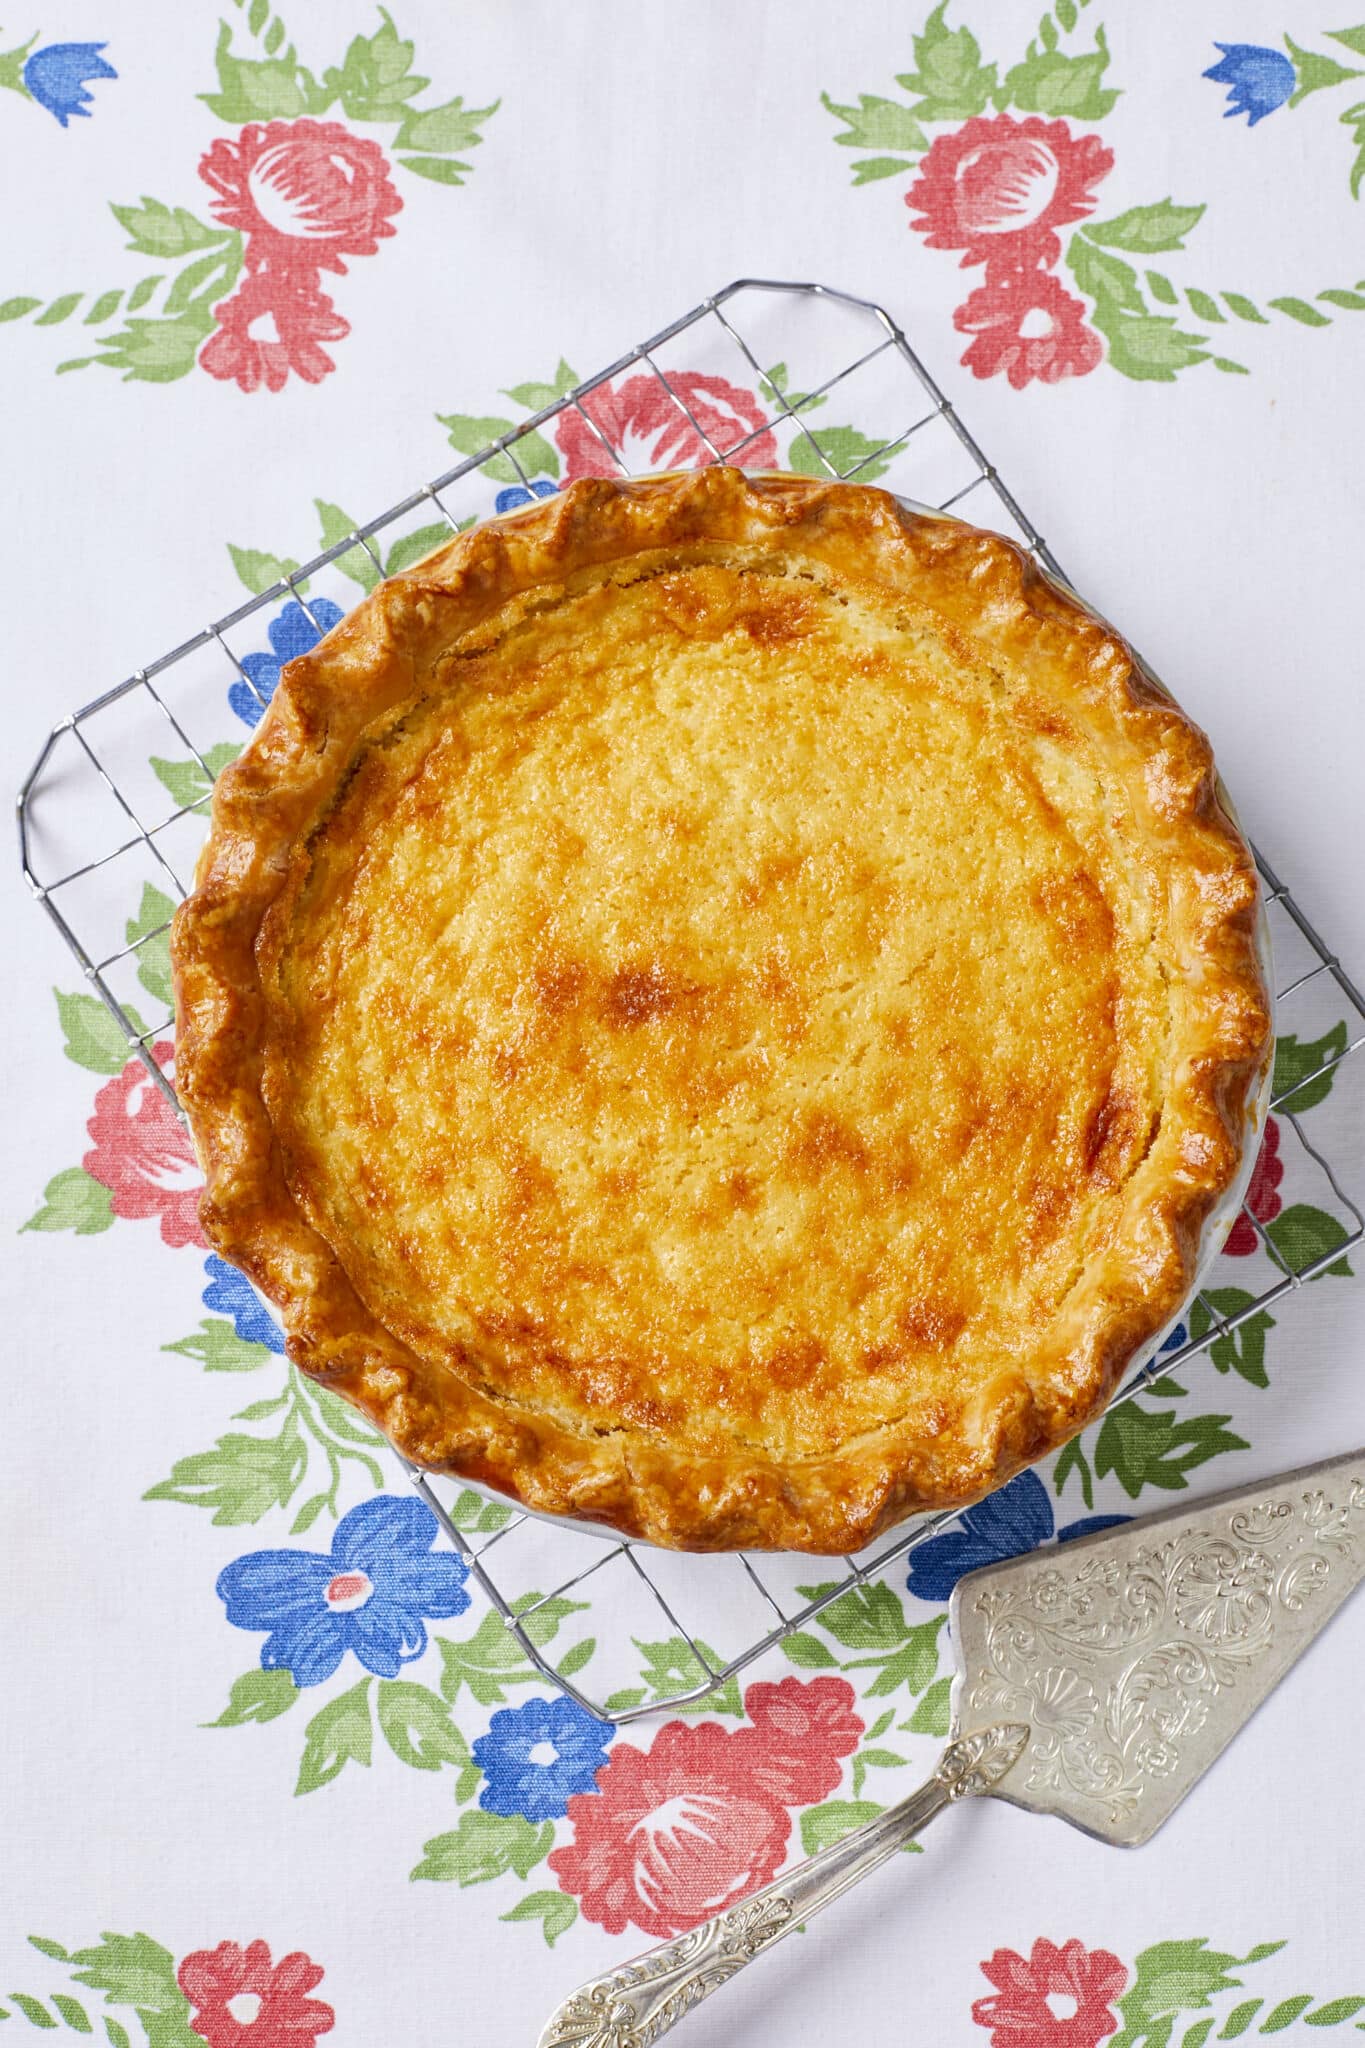 An Irresistible Buttermilk Pie is baked perfect with golden-brown crust and creamy, tangy filling. It's cooling on a wire rack. 